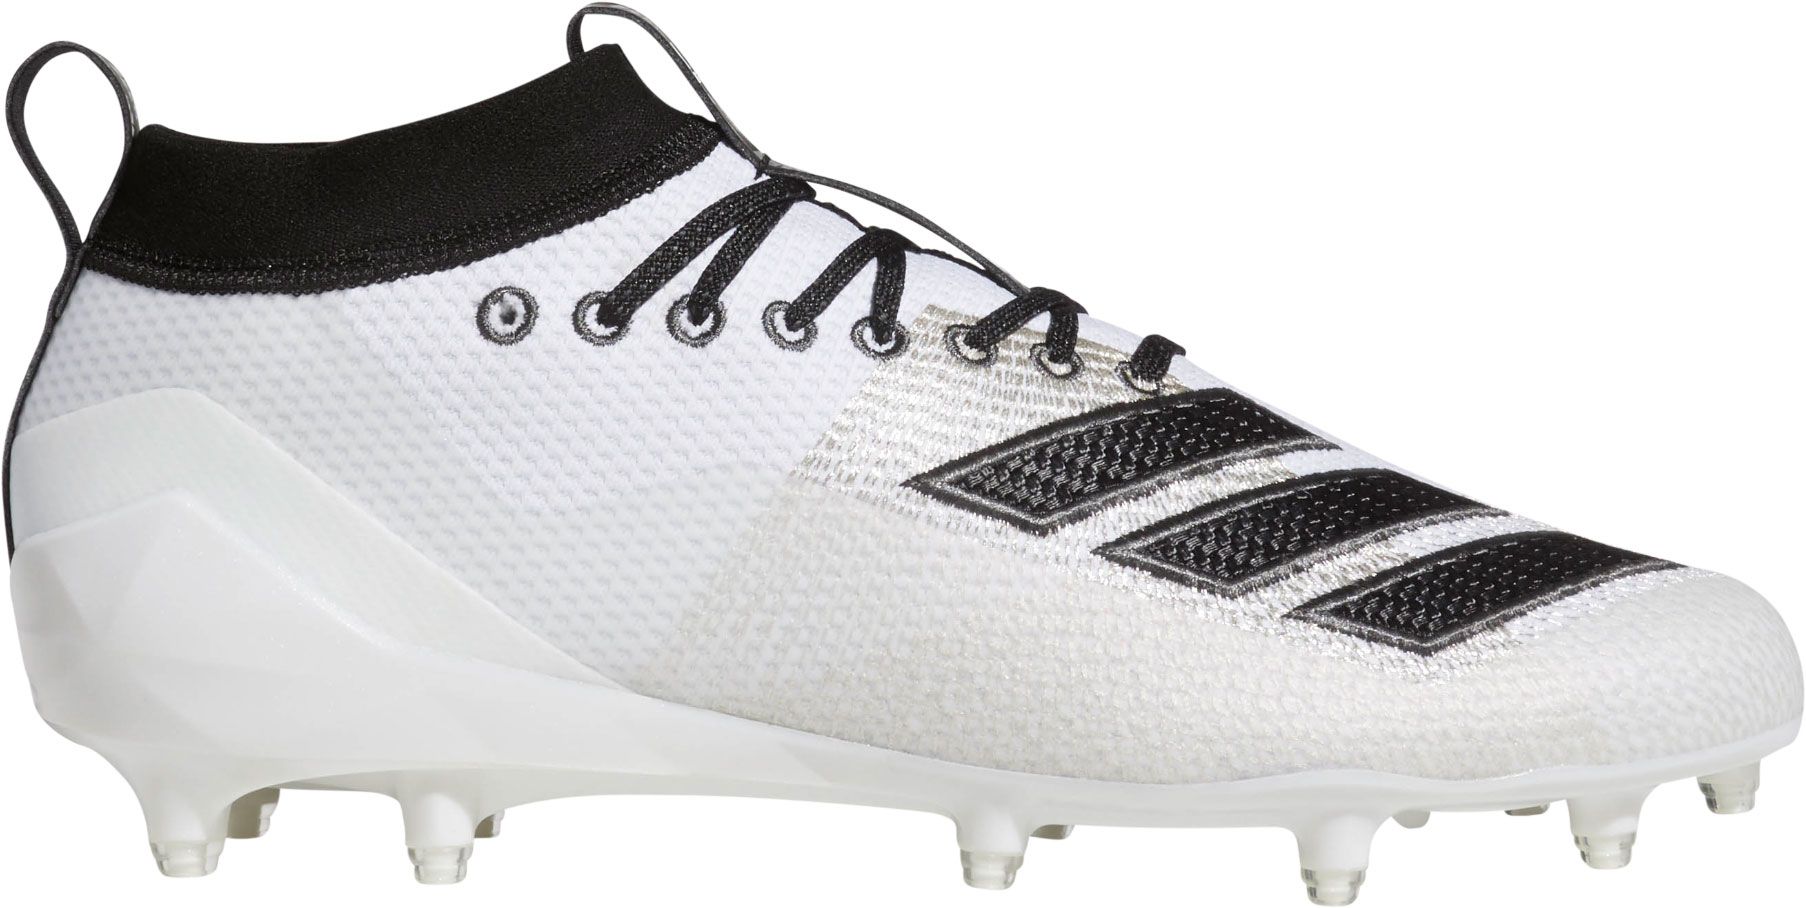 White Football Cleats | Best Price Guarantee at DICK'S